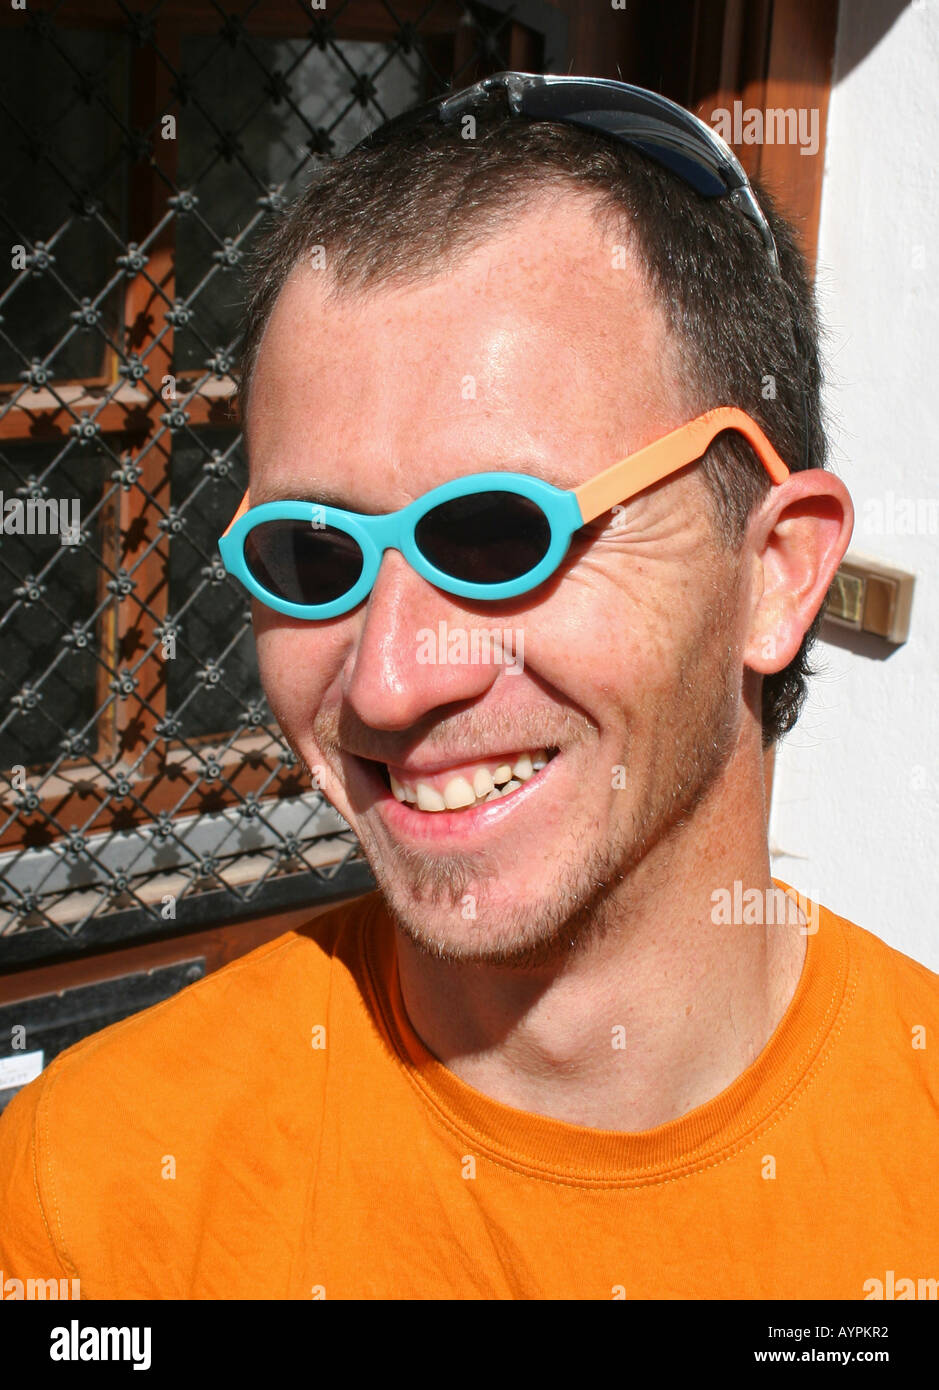 man with funny kid glasses Stock Photo - Alamy